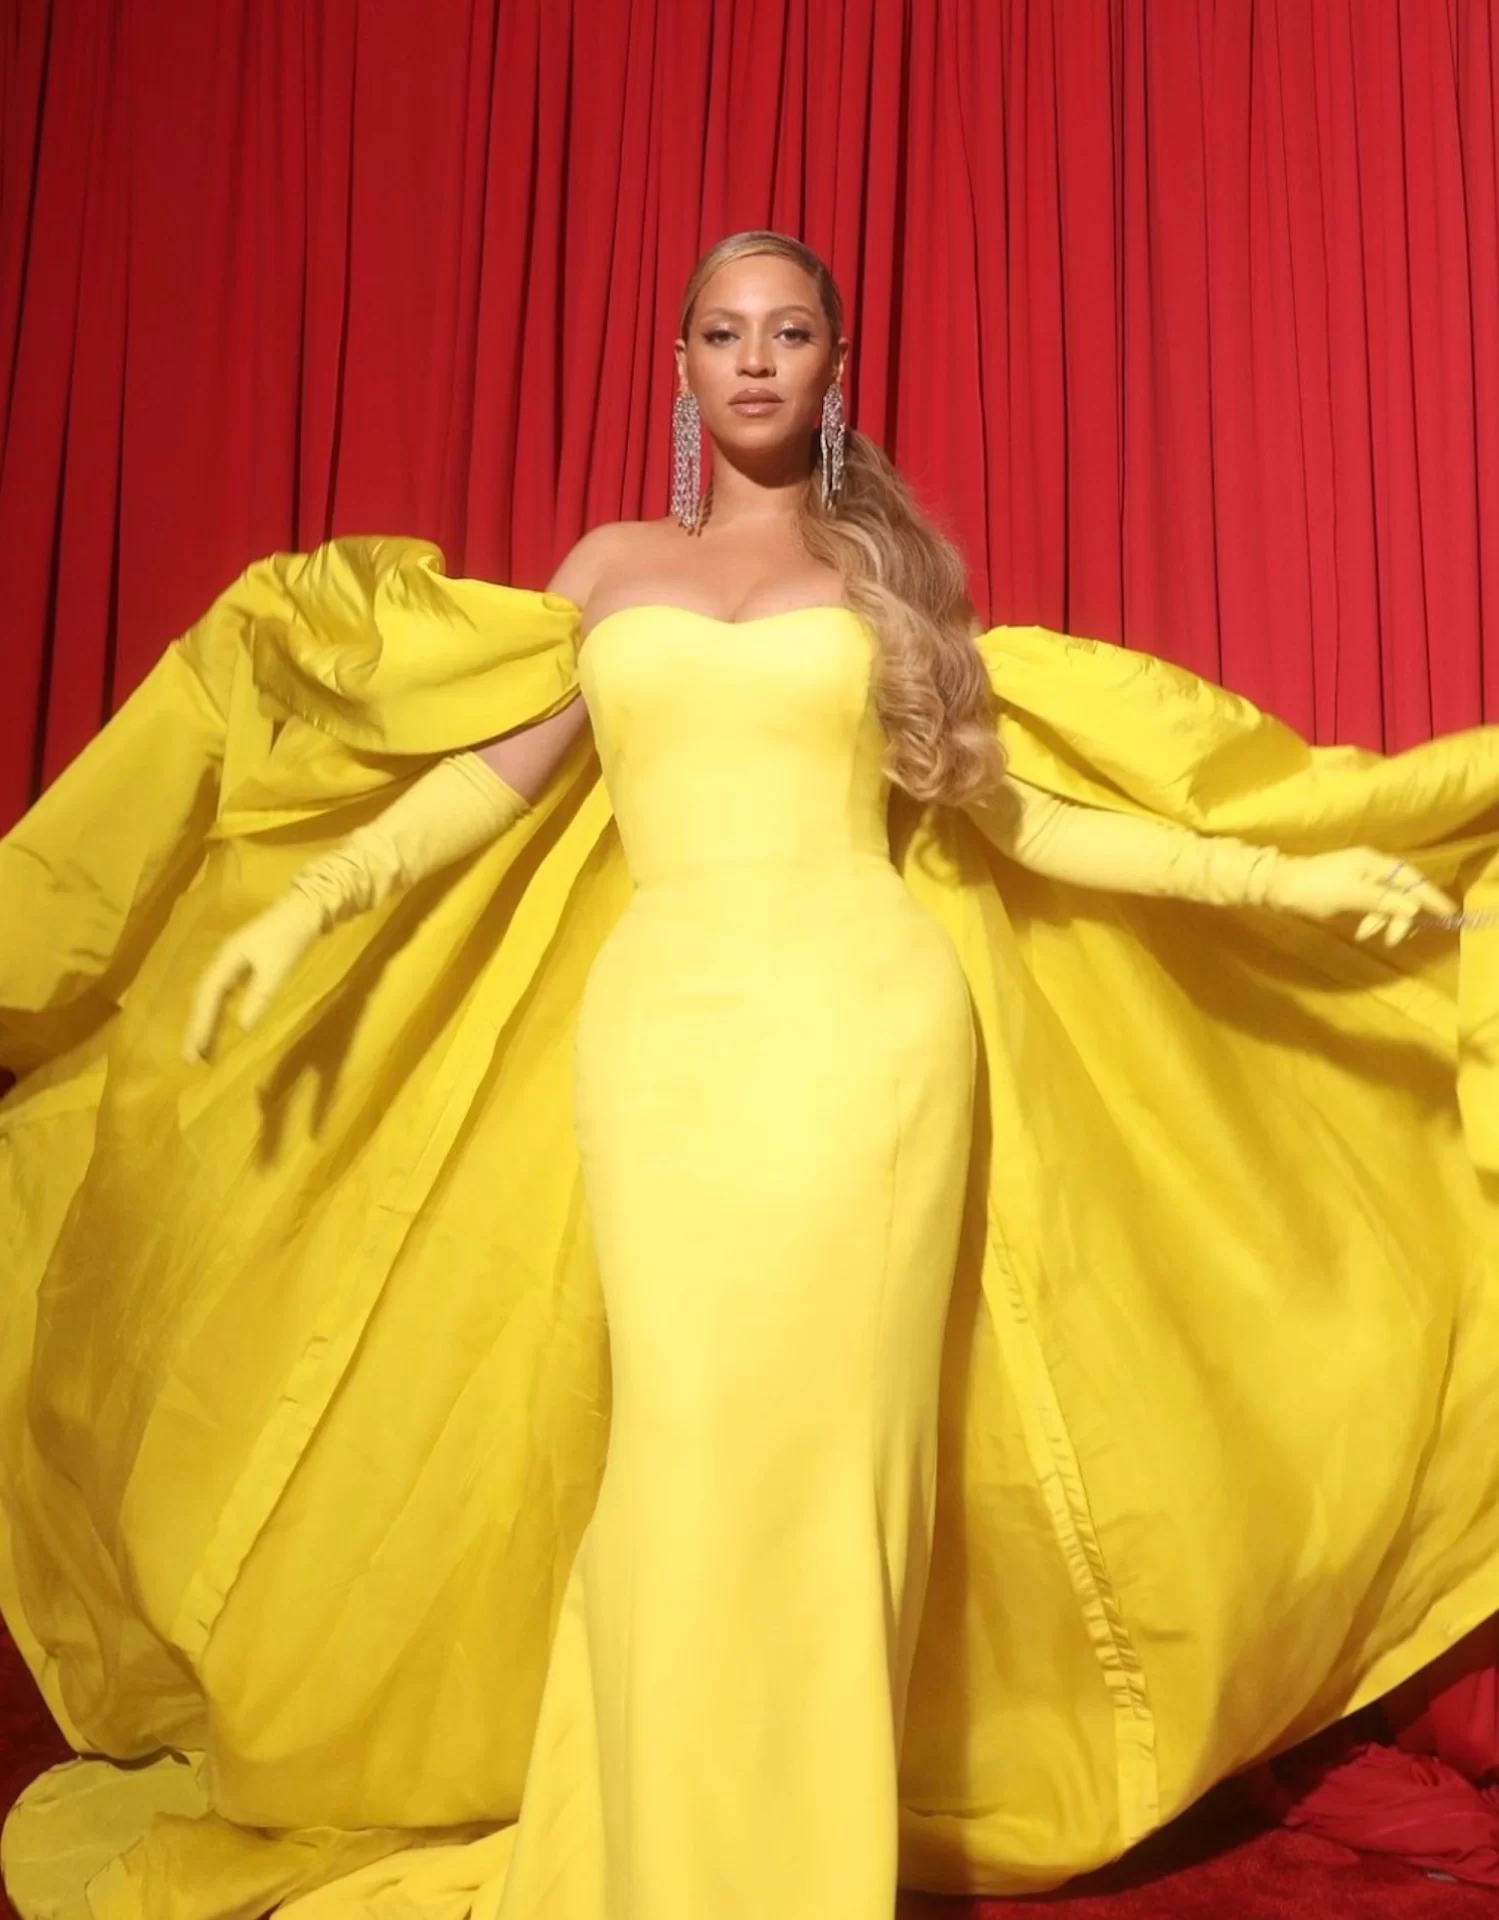 Beyoncé Biography: Real Name, Age, Net Worth, Husband, Children, Height, Parents, Fashion Line &Amp; Company, Yours Truly, Artists, August 13, 2022